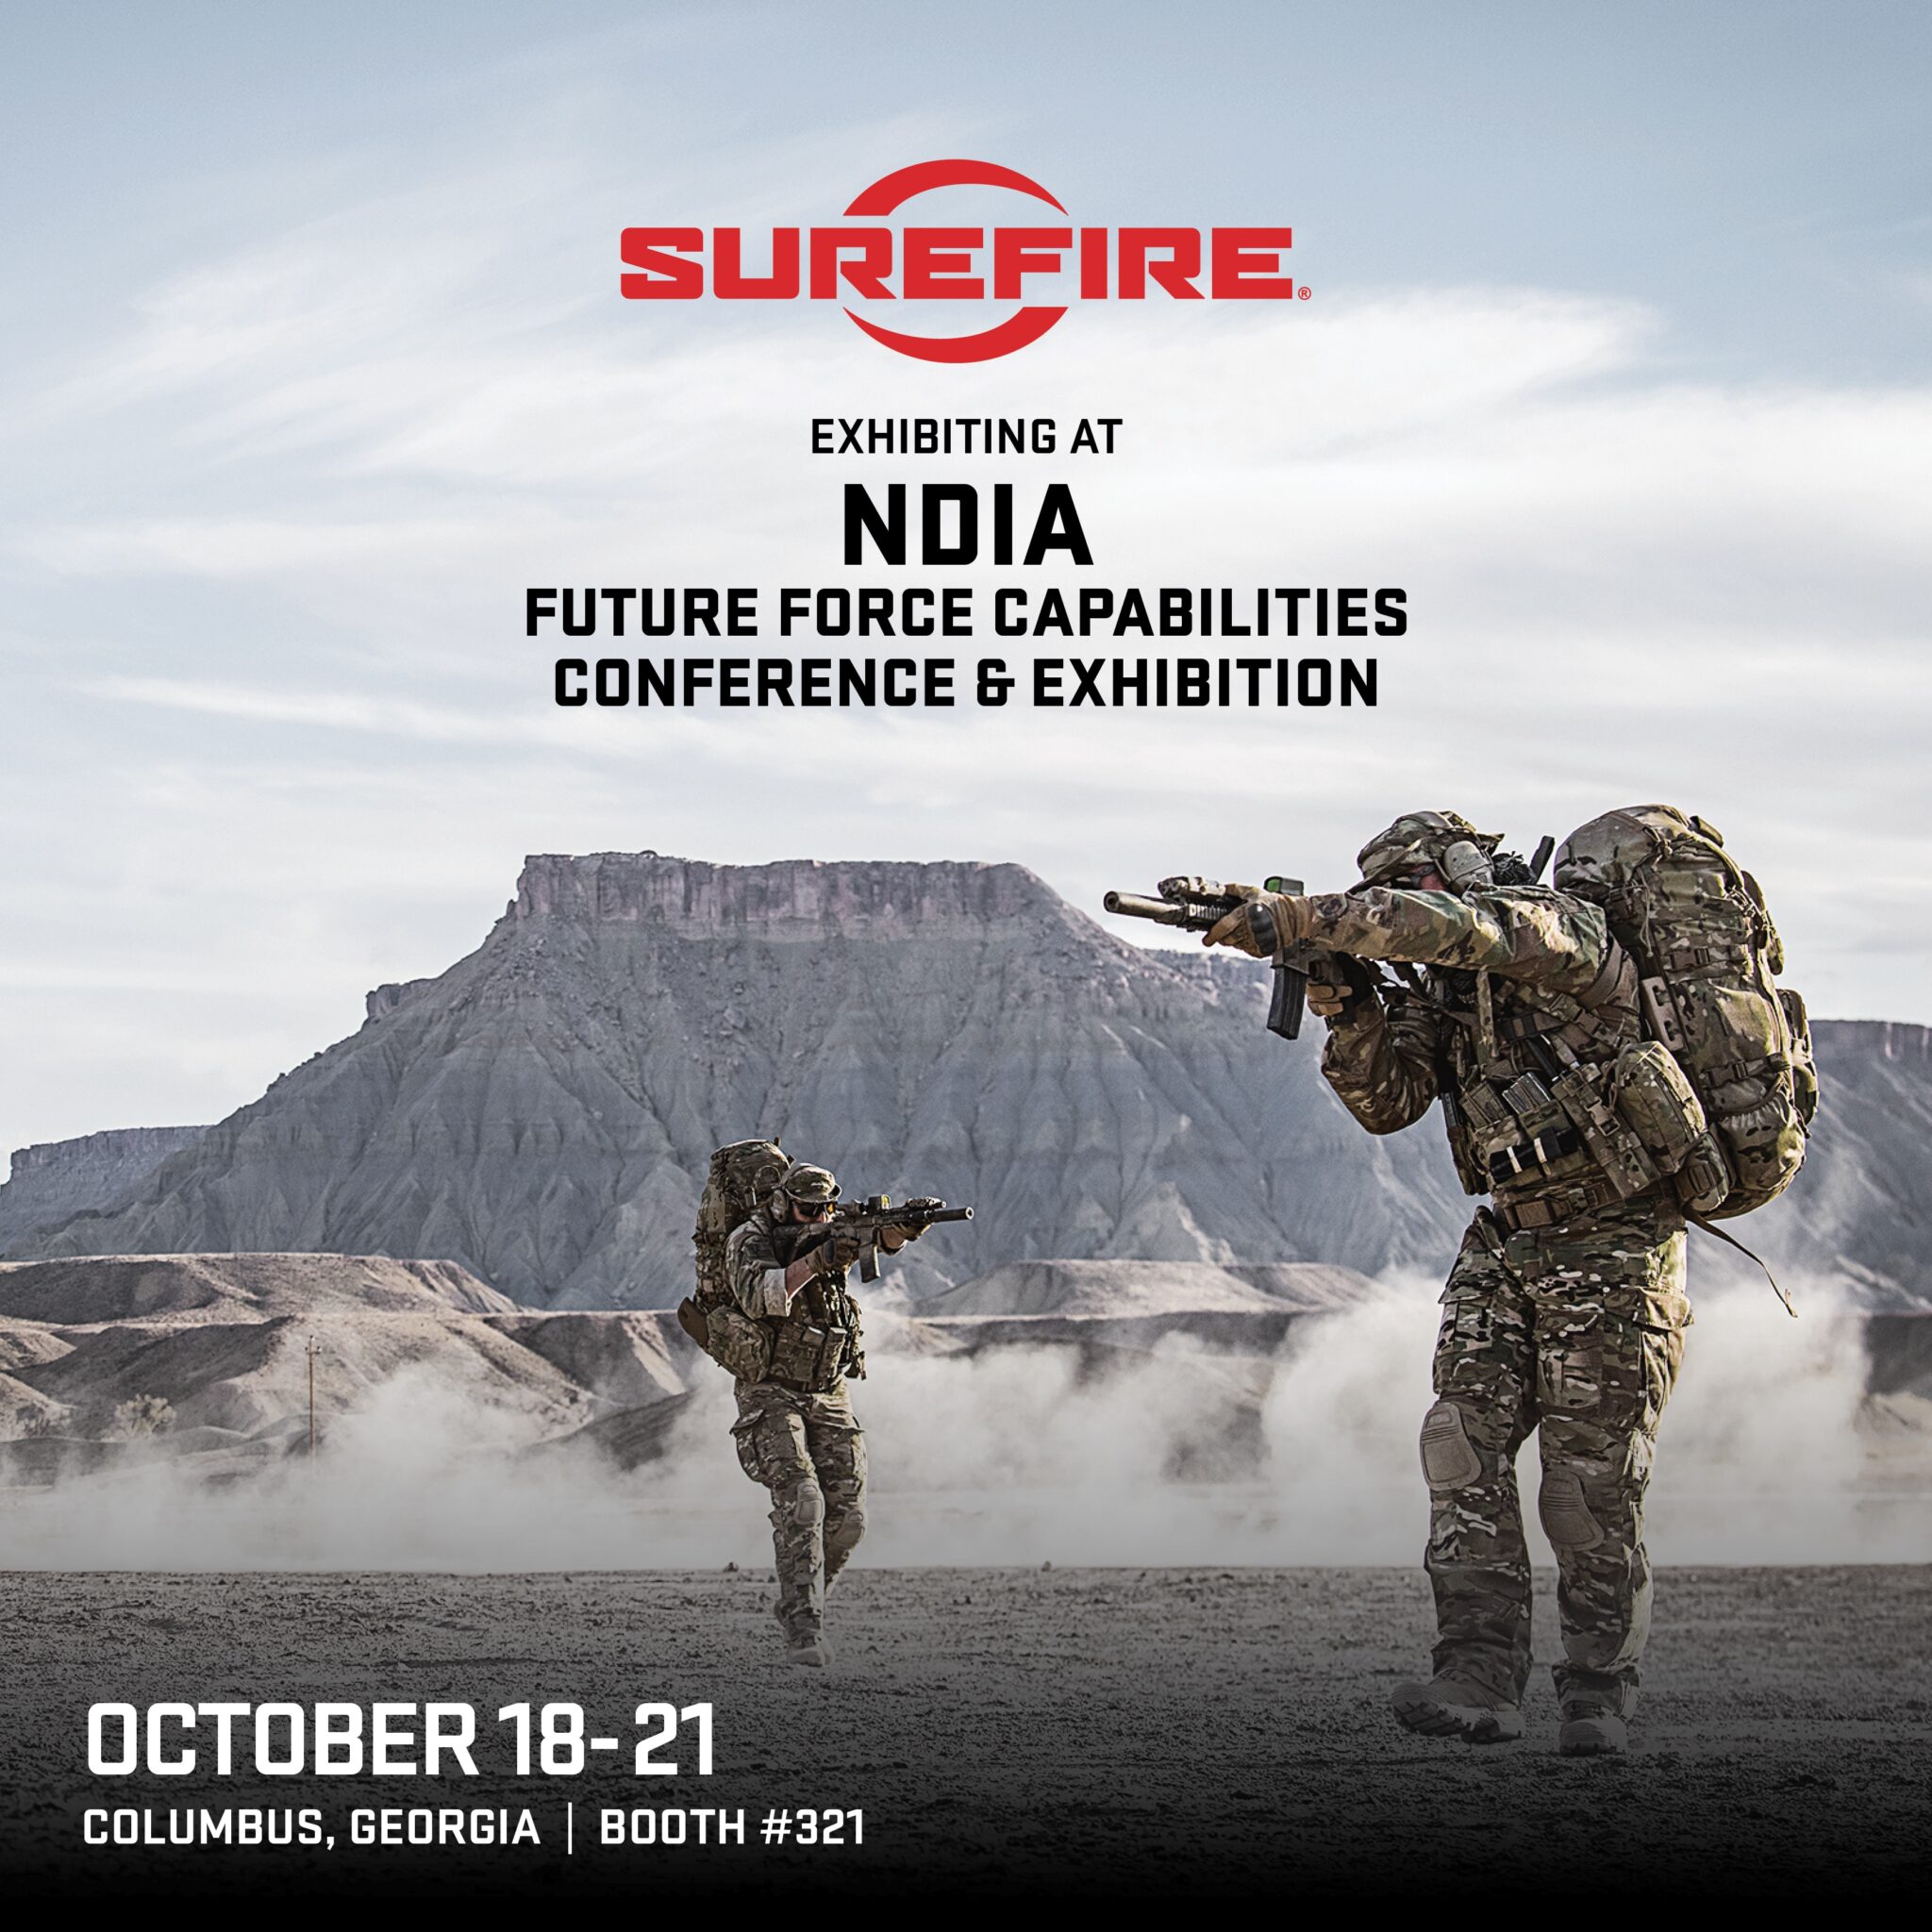 SureFire Exhibiting at NDIA Future Force Capabilities Conference